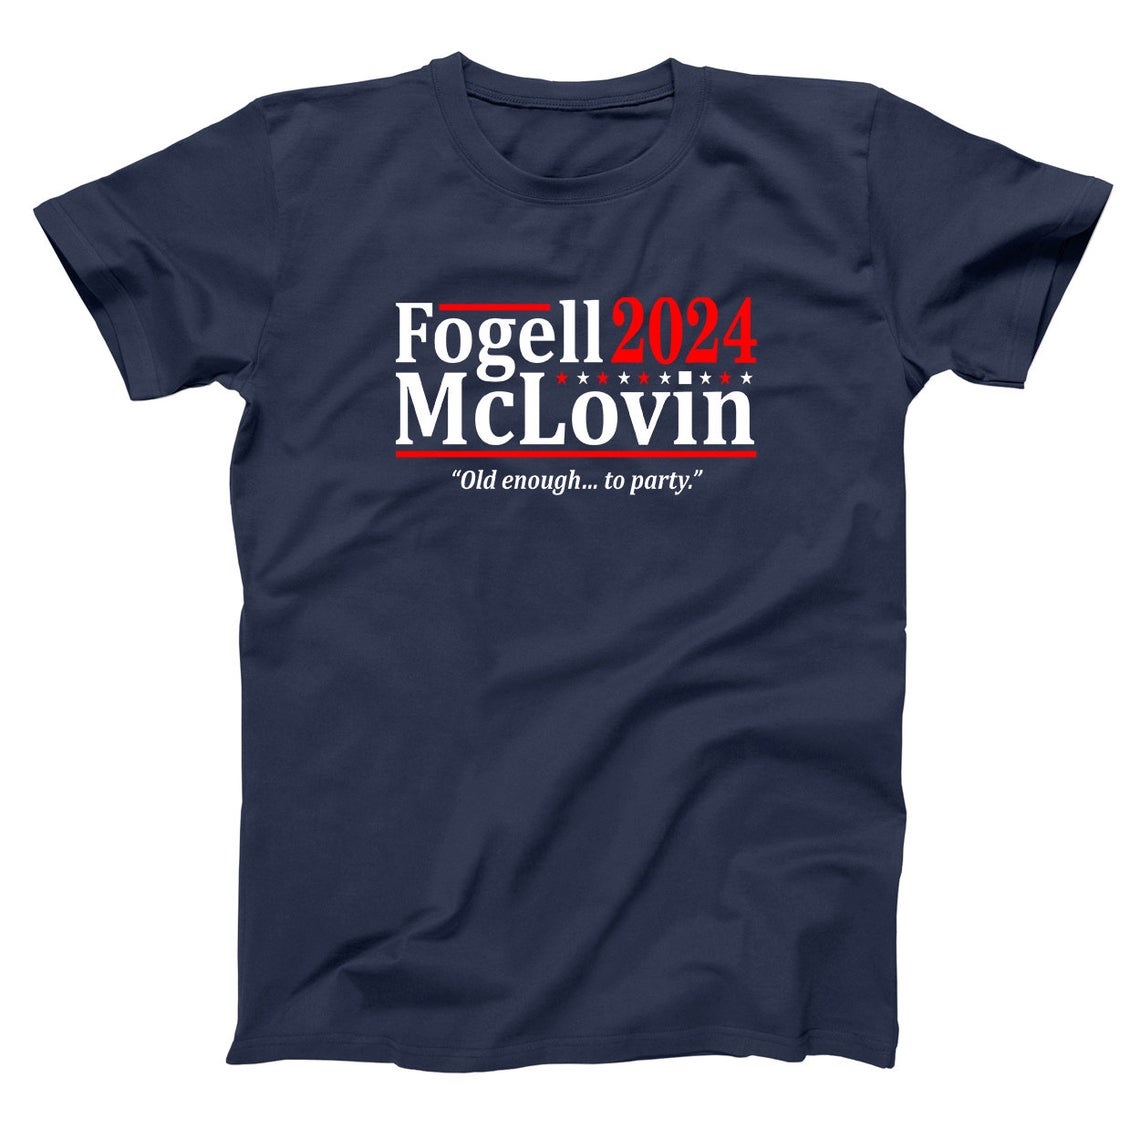 Fogell Mclovin 2024 Old Enough To Party Shirt